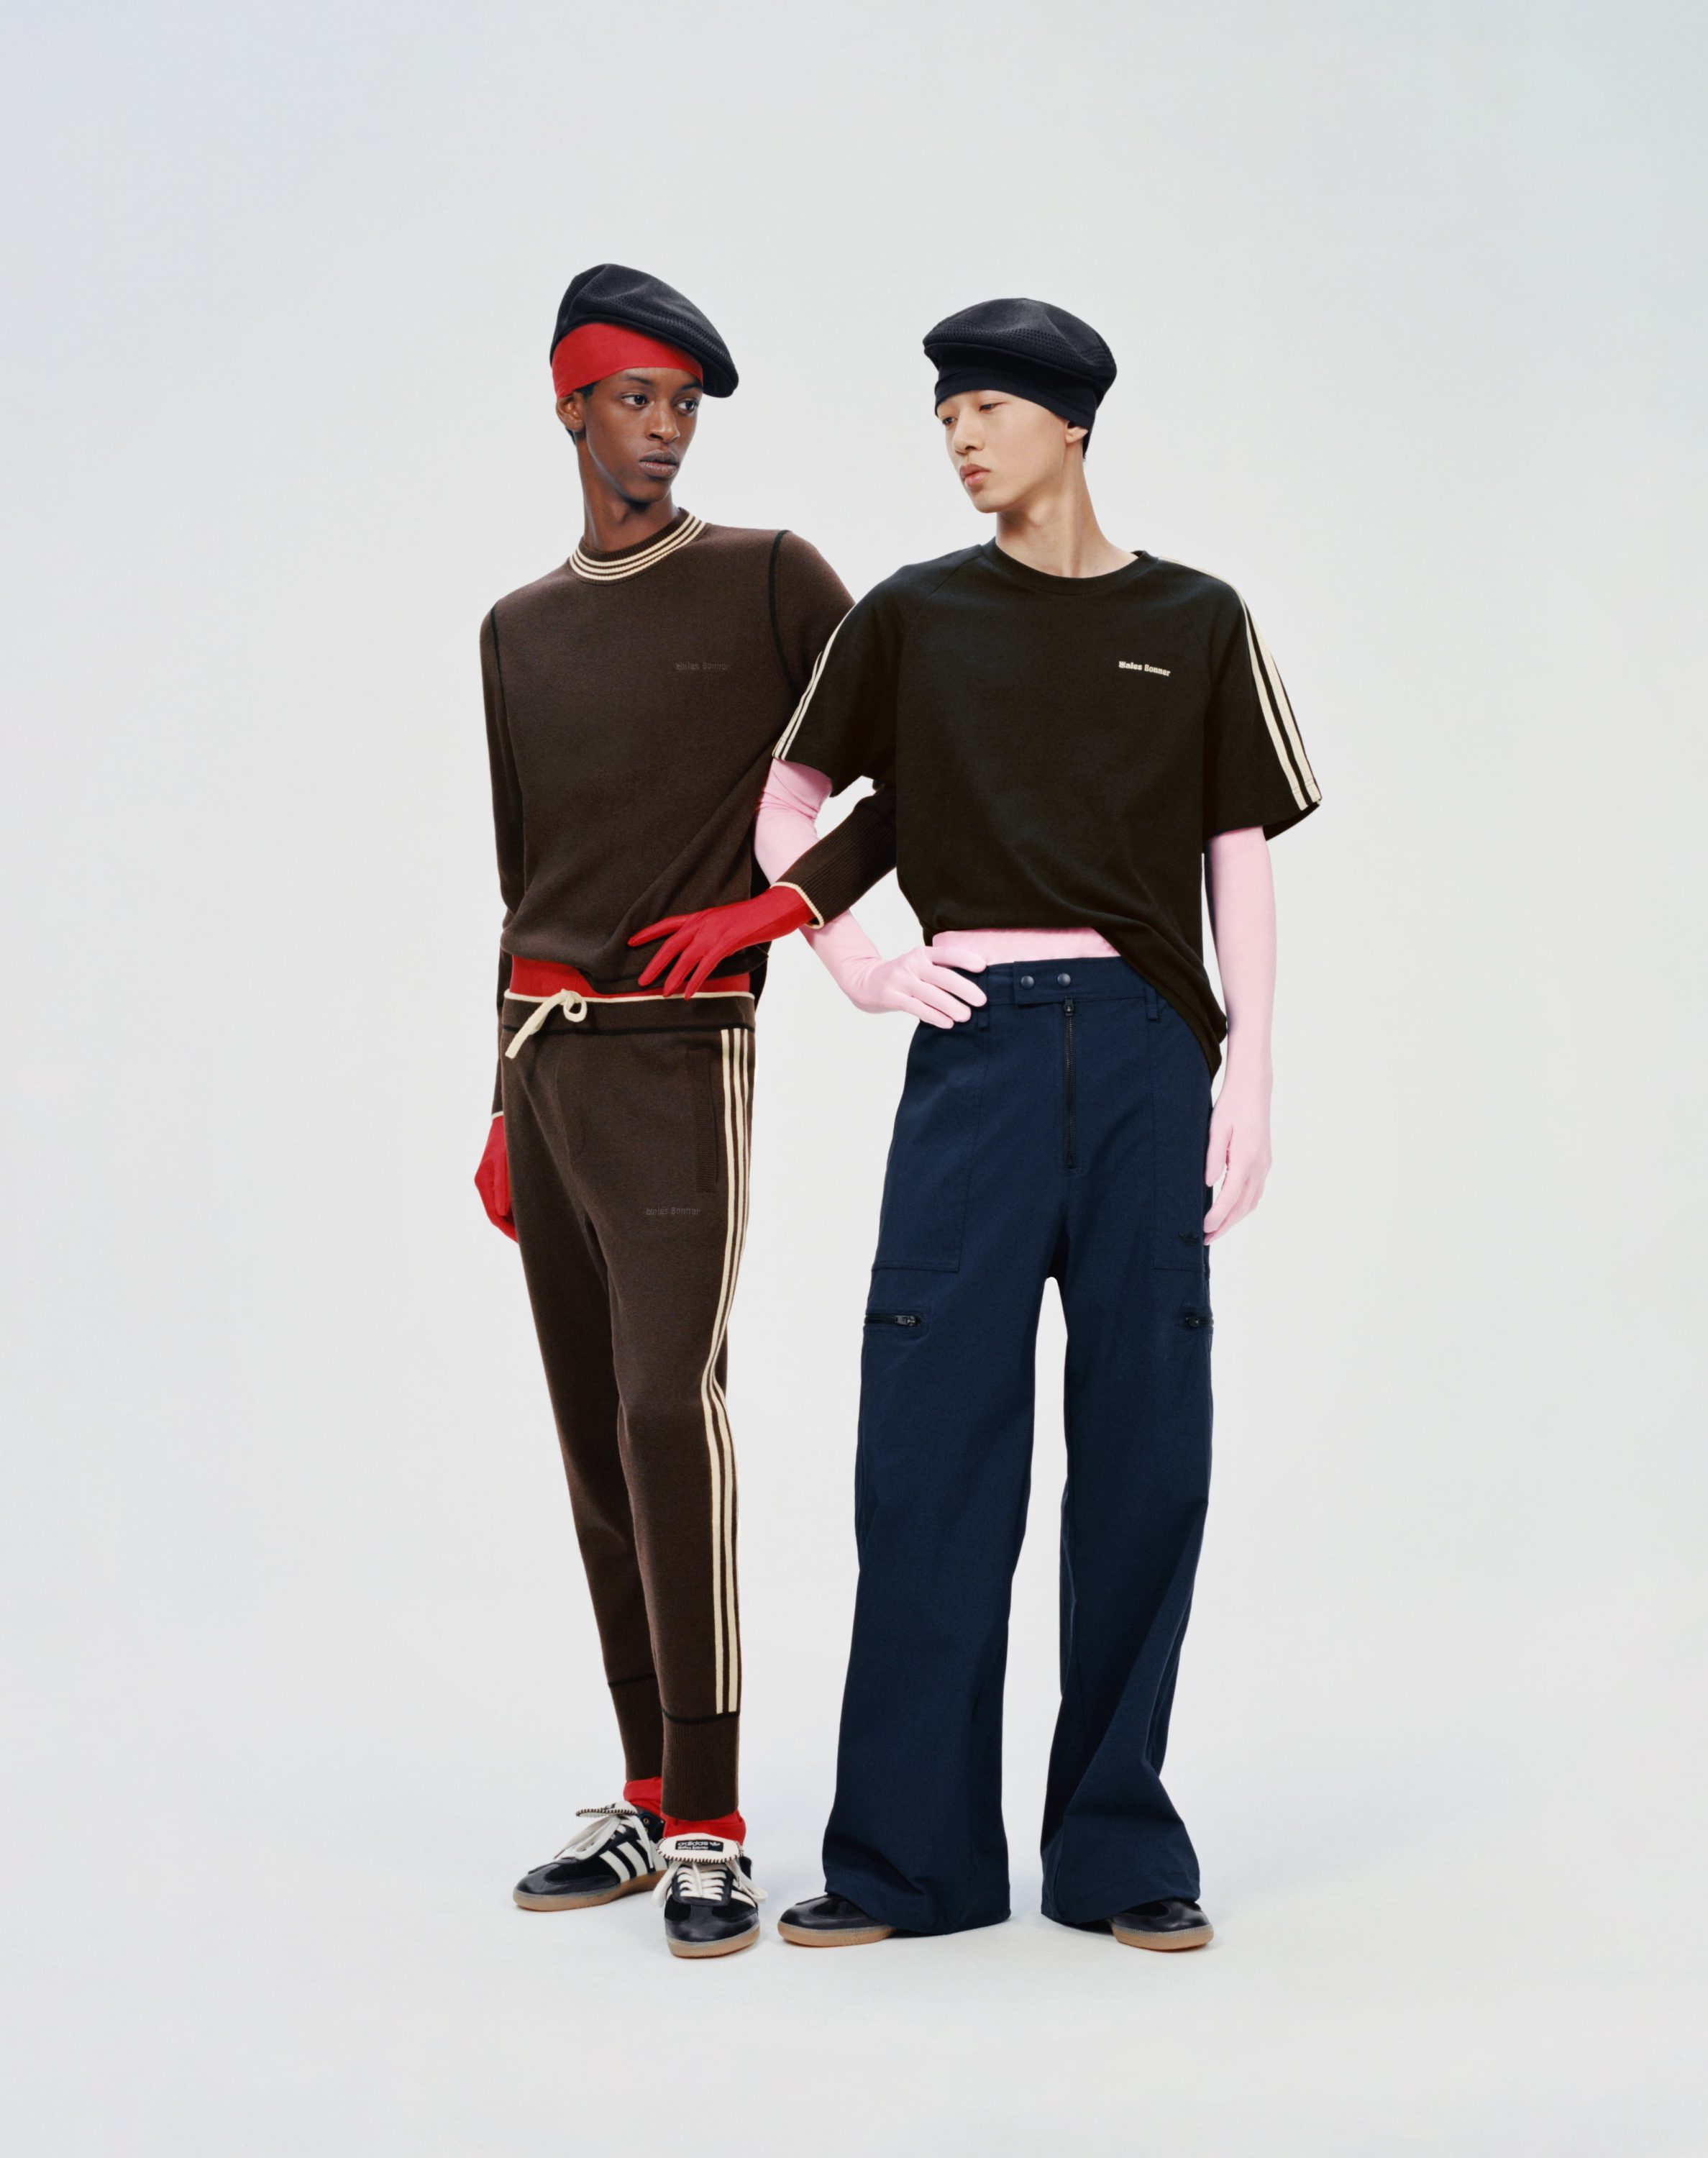 Adidas Originals and Wales Bonner Collaborate for Fall/Winter 2023 ...